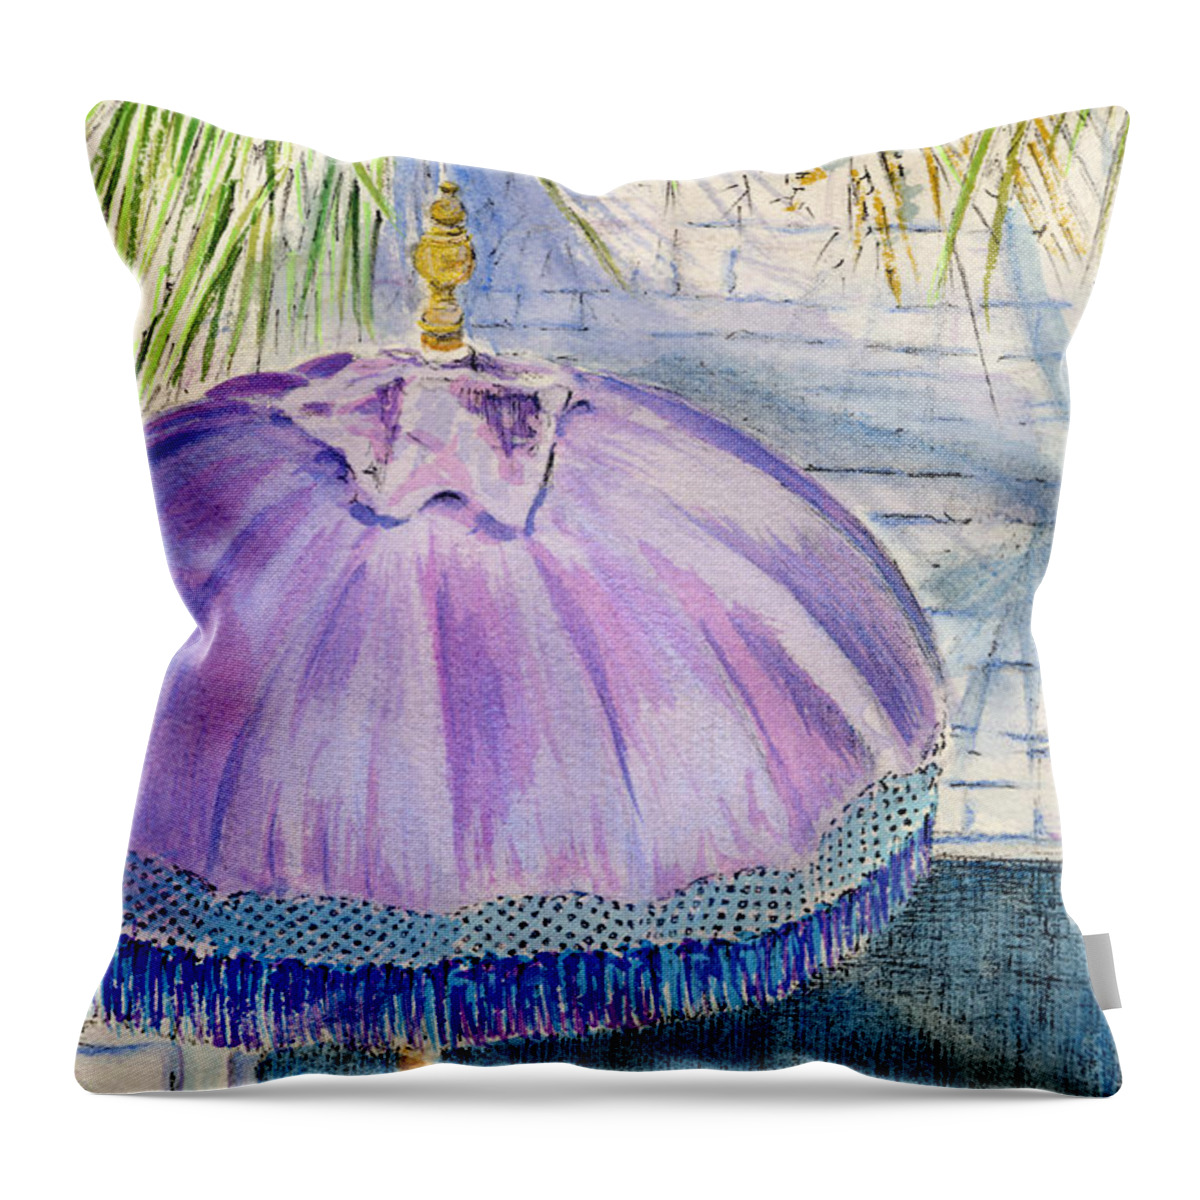 Stucco Throw Pillow featuring the painting Purple Umbrella by Thomas Hamm